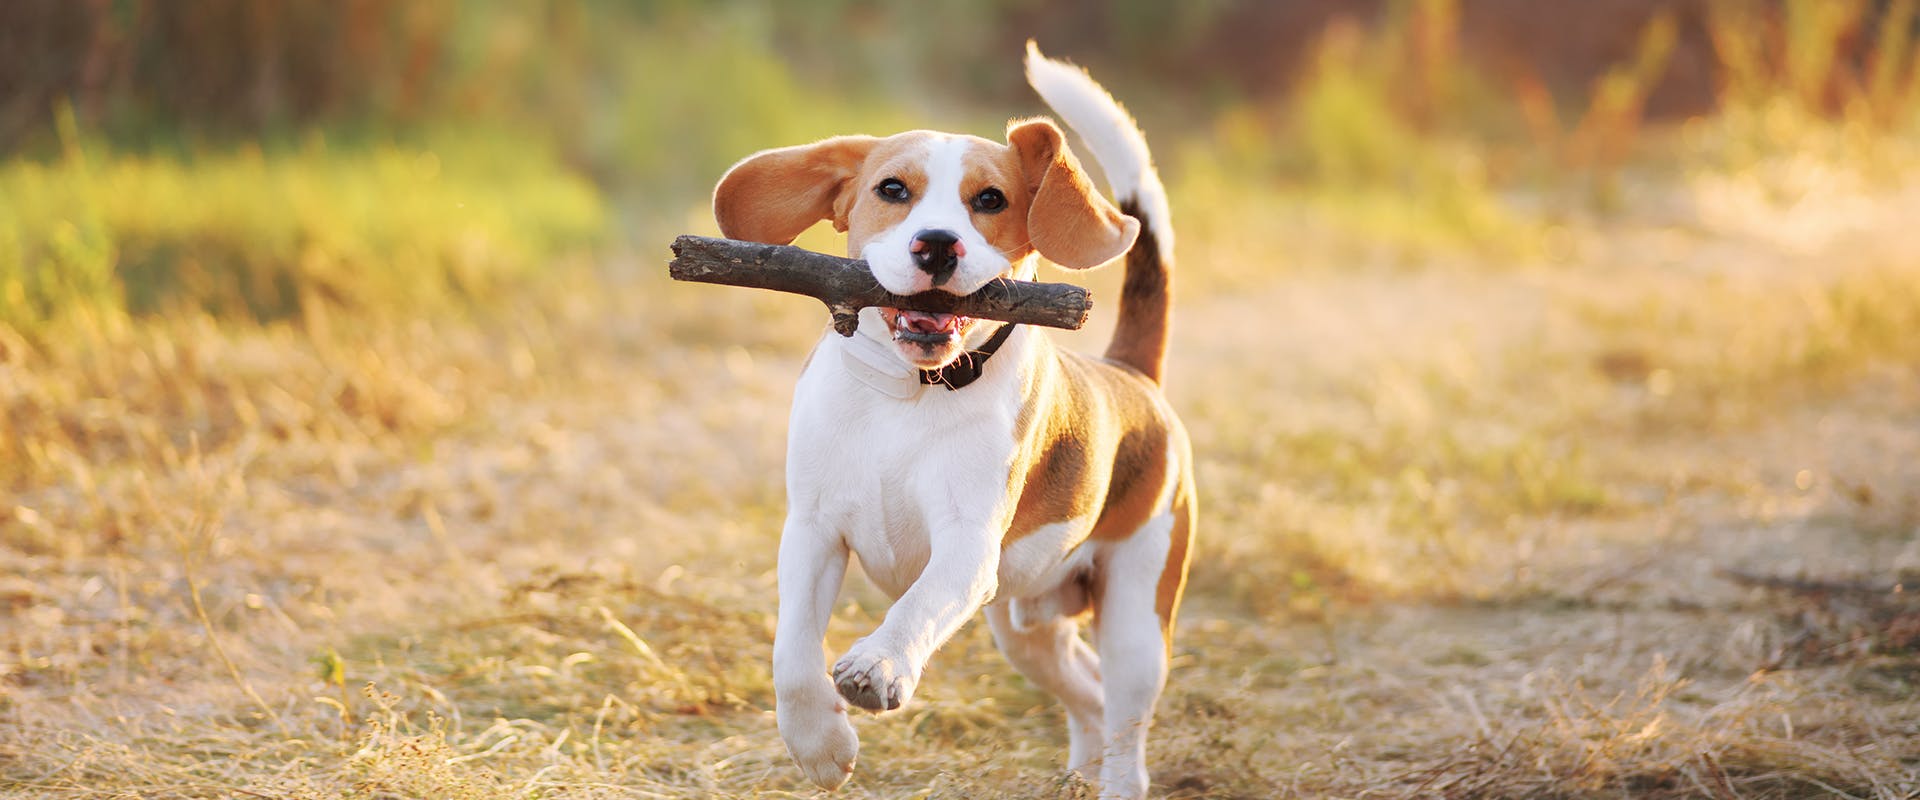 A Beagle puppy running through a field with a stick in his mouth